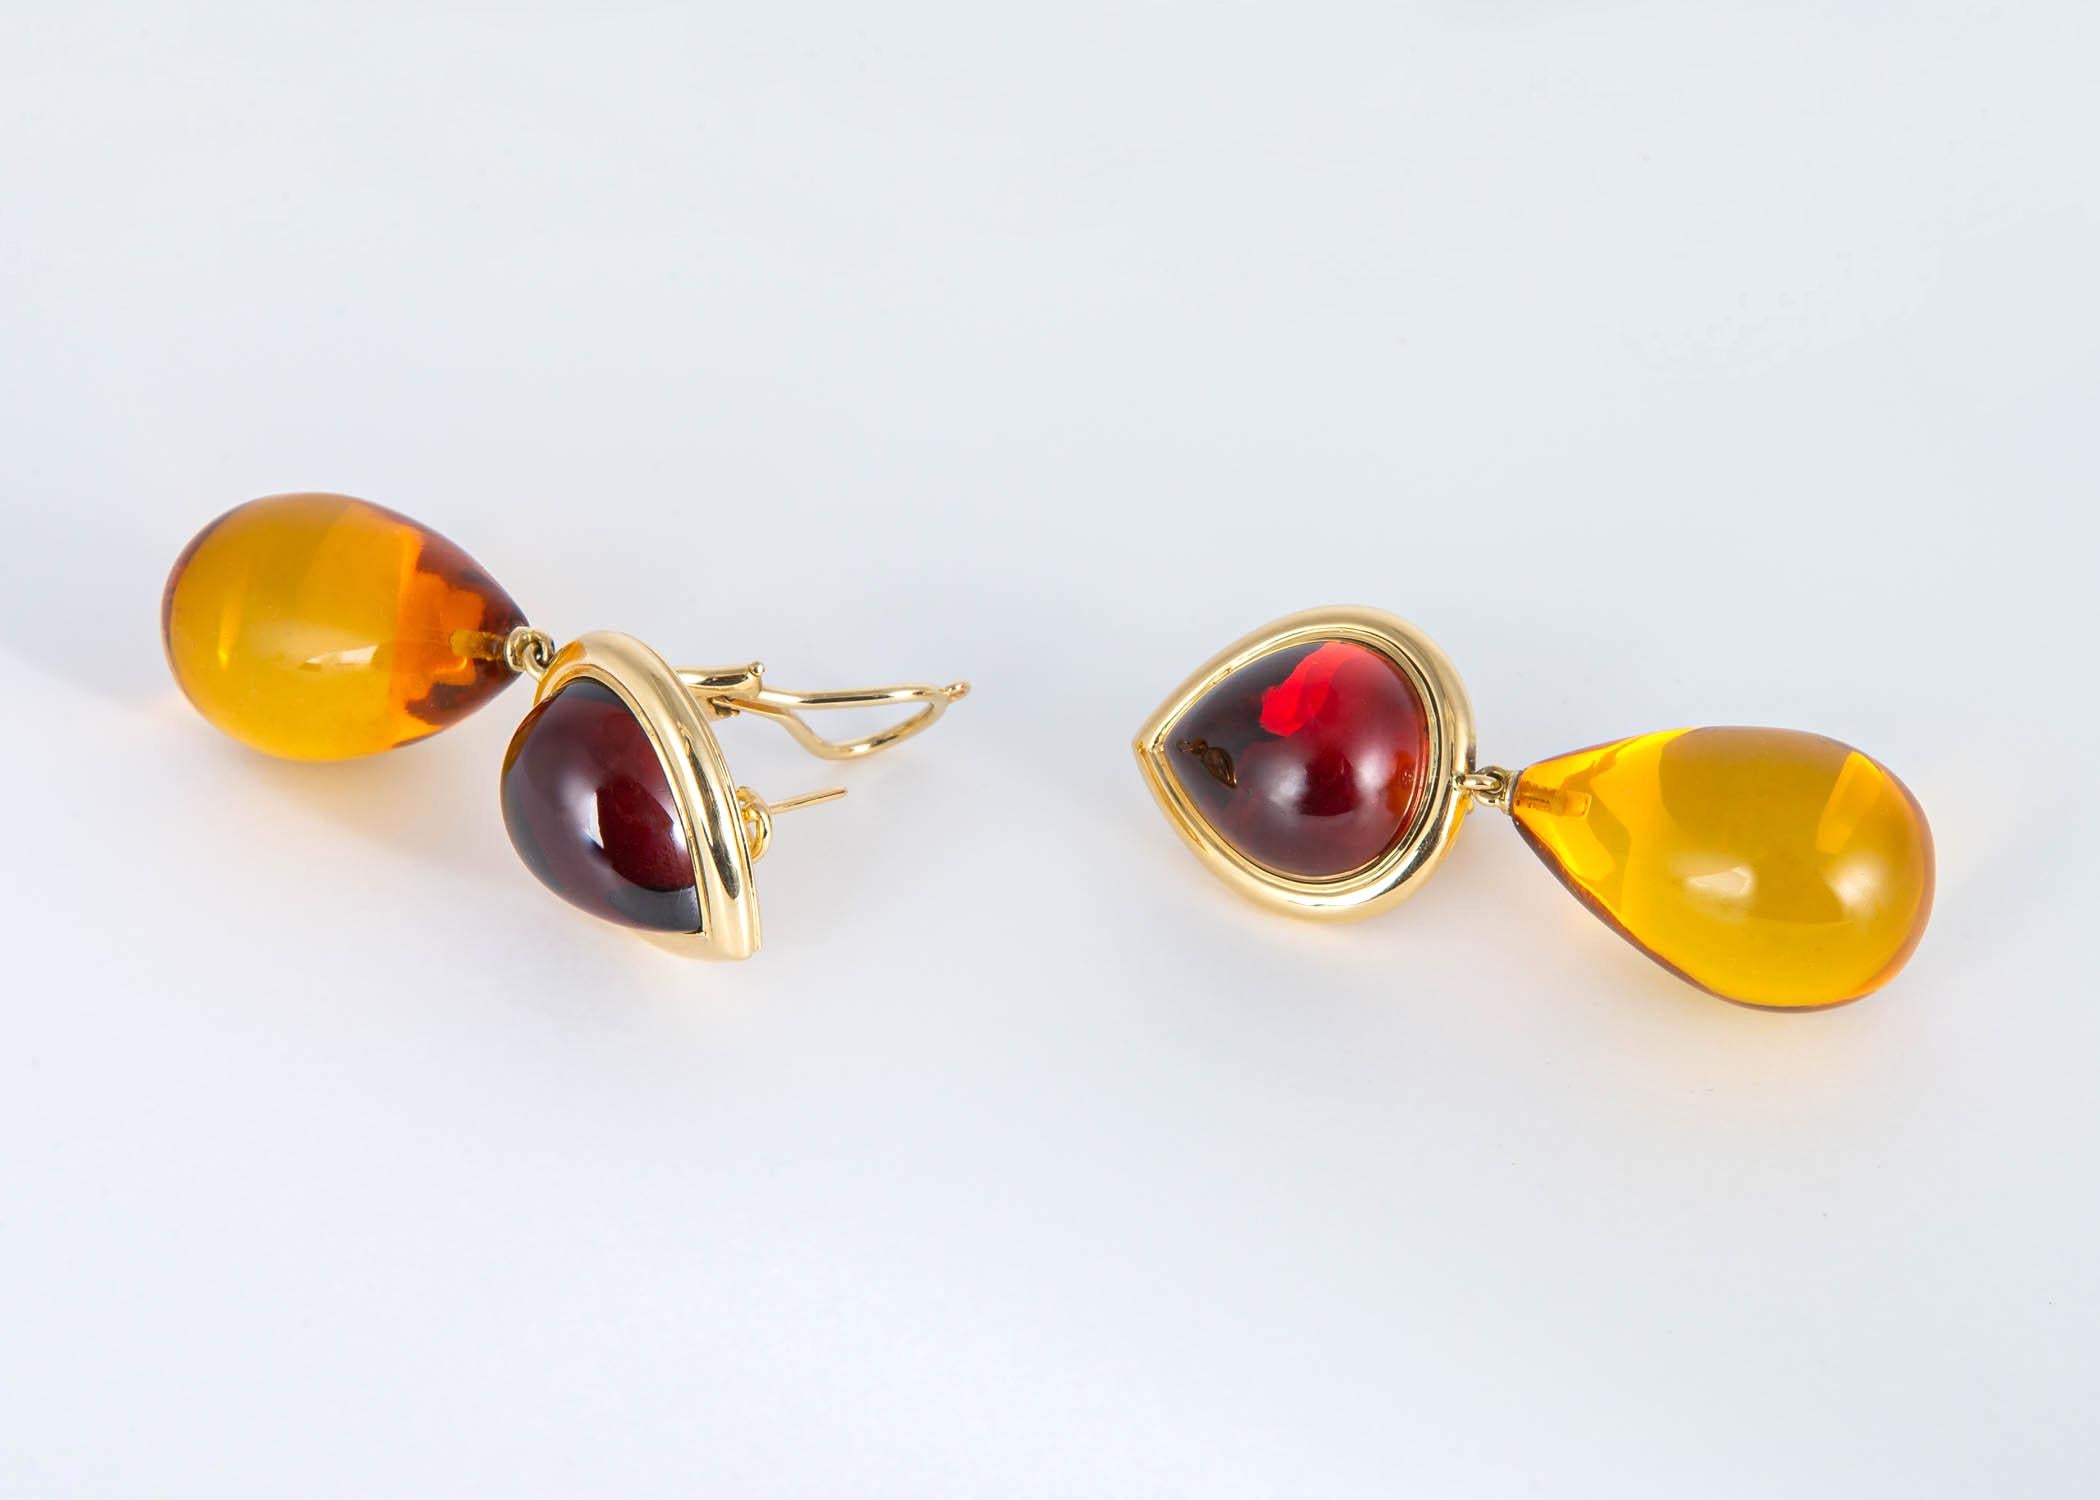 Completely handmade and unique. Featuring a pair of cabochon garnets that simply glow from with in and a rich pair of amber drops. A  true statement piece. 2 1/8 inches in length.